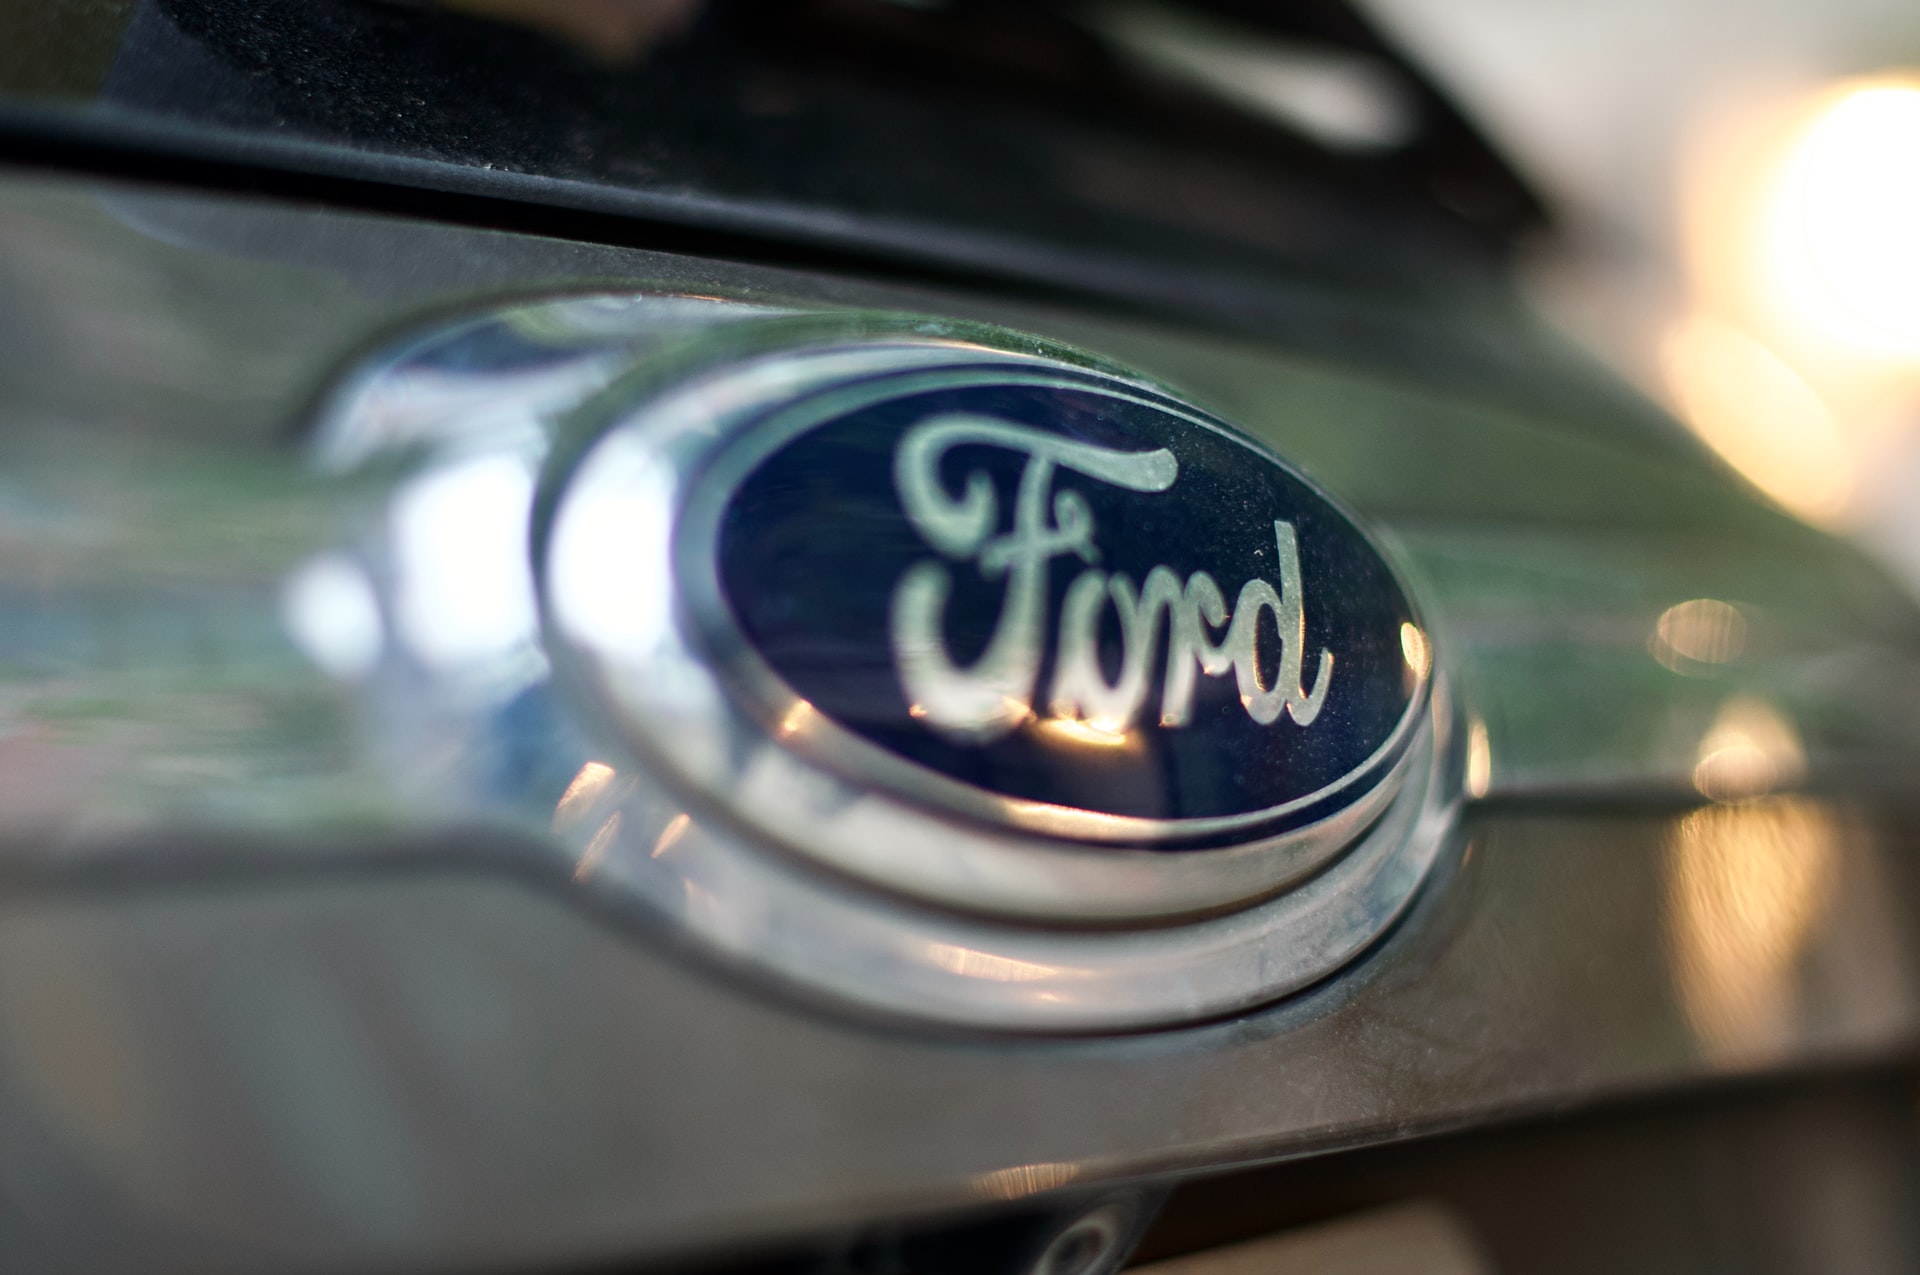 Ford badge on car's front grill, close up